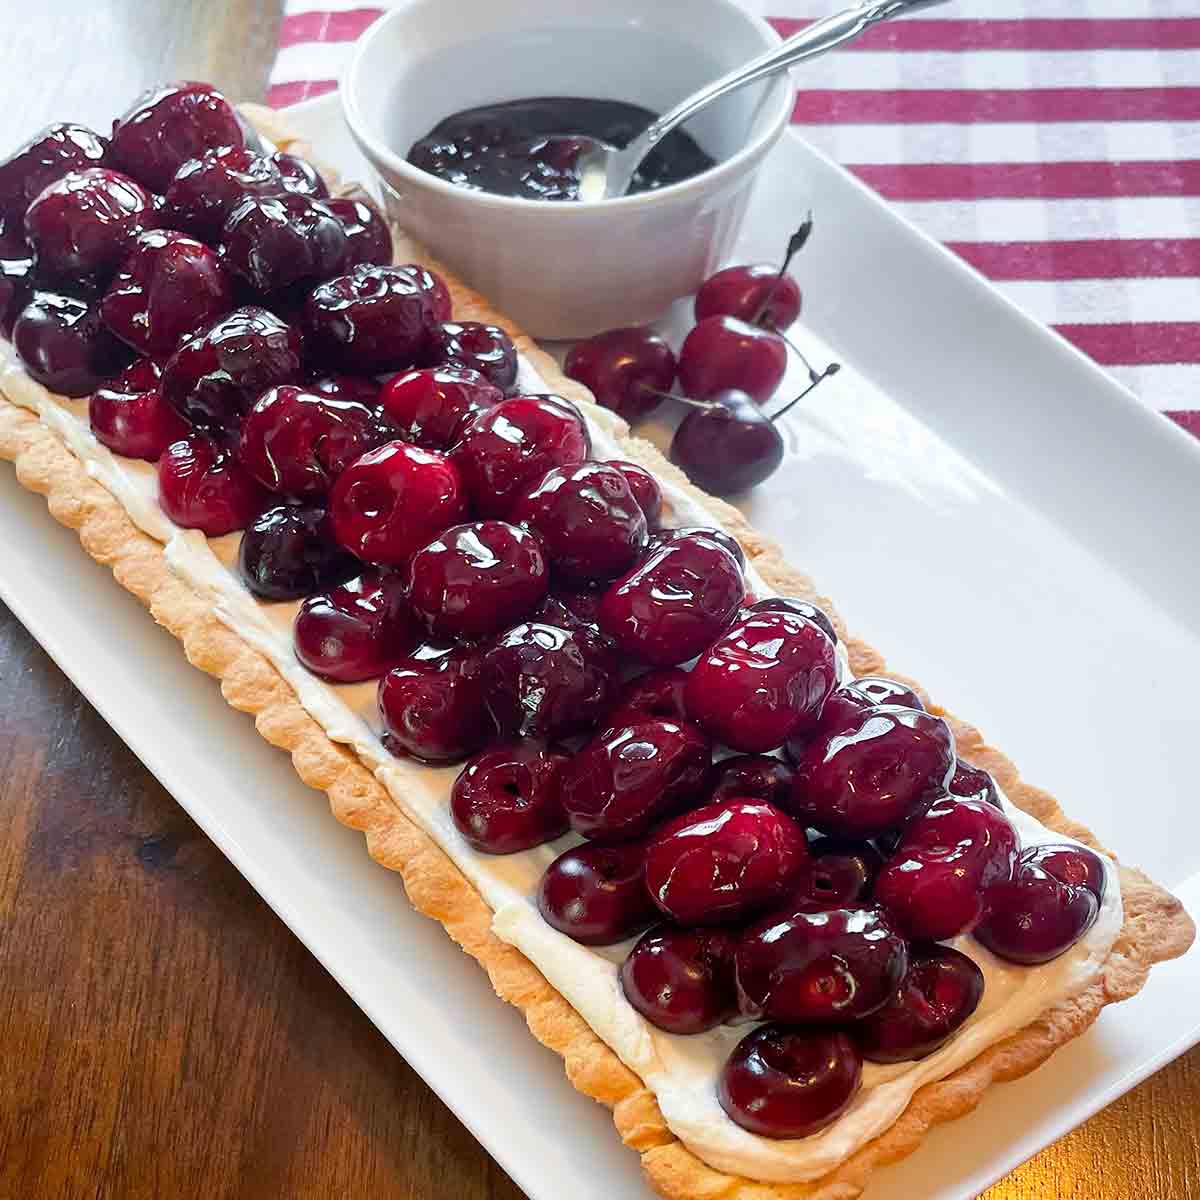 A fresh cherry tart with cream cheese filling on a white rectangular platter with a bowl of jam and a few fresh cherries on the side.